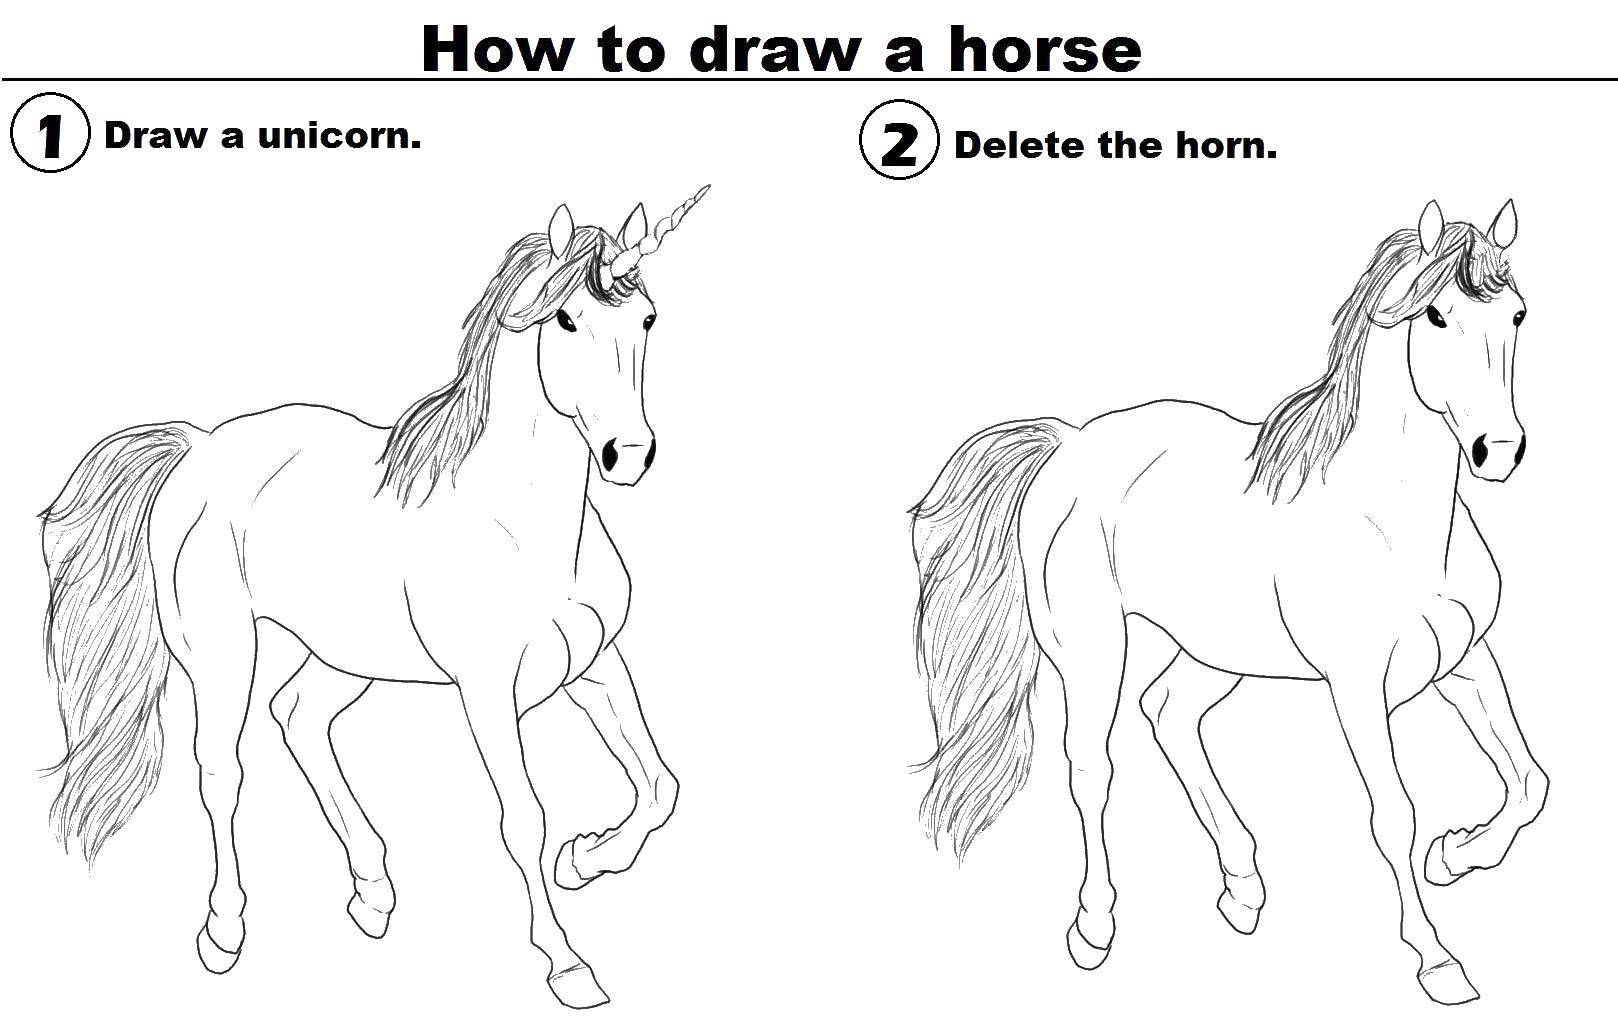 Coloring The unicorn and the horse. Category how to draw step by step. Tags:  unicorn, horse, tail.